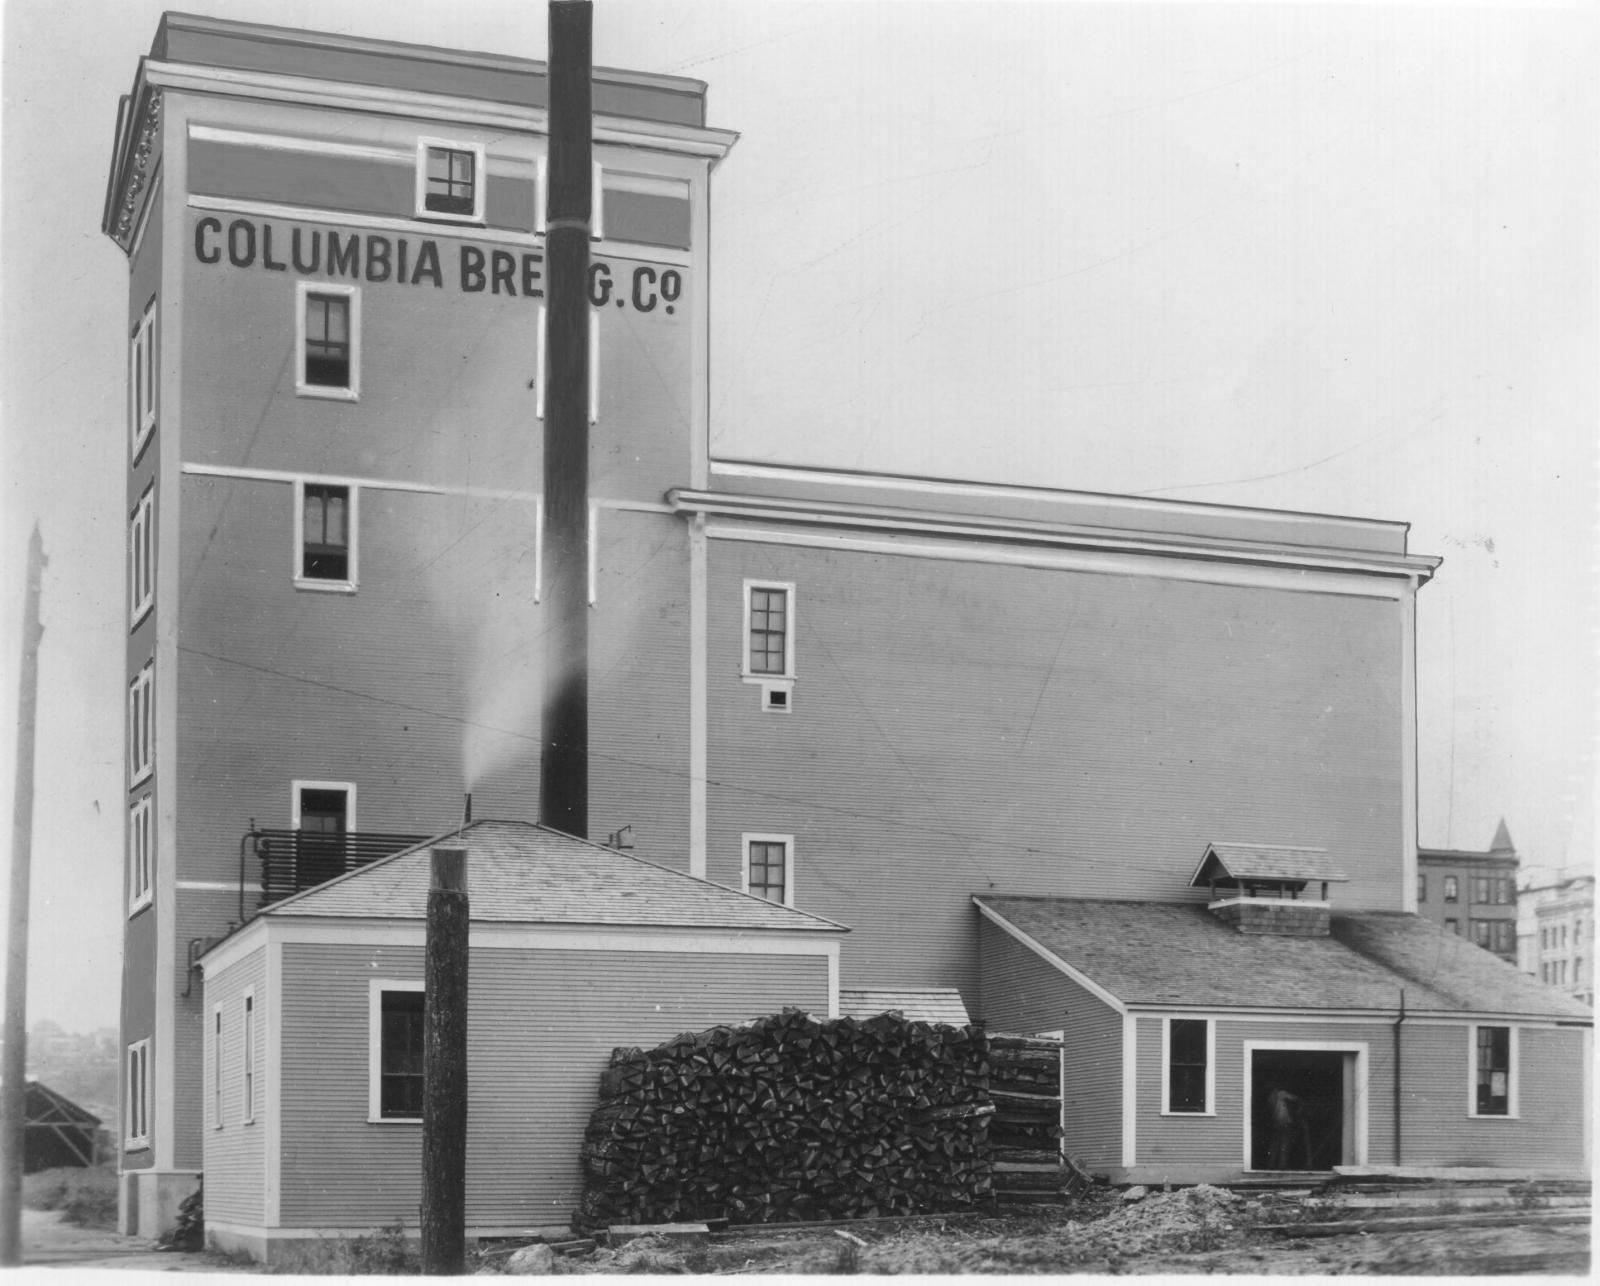 Columbia Brewing Company’s original building, ca. 1912 (Richards Studio, used with permission from Tacoma Public Library)